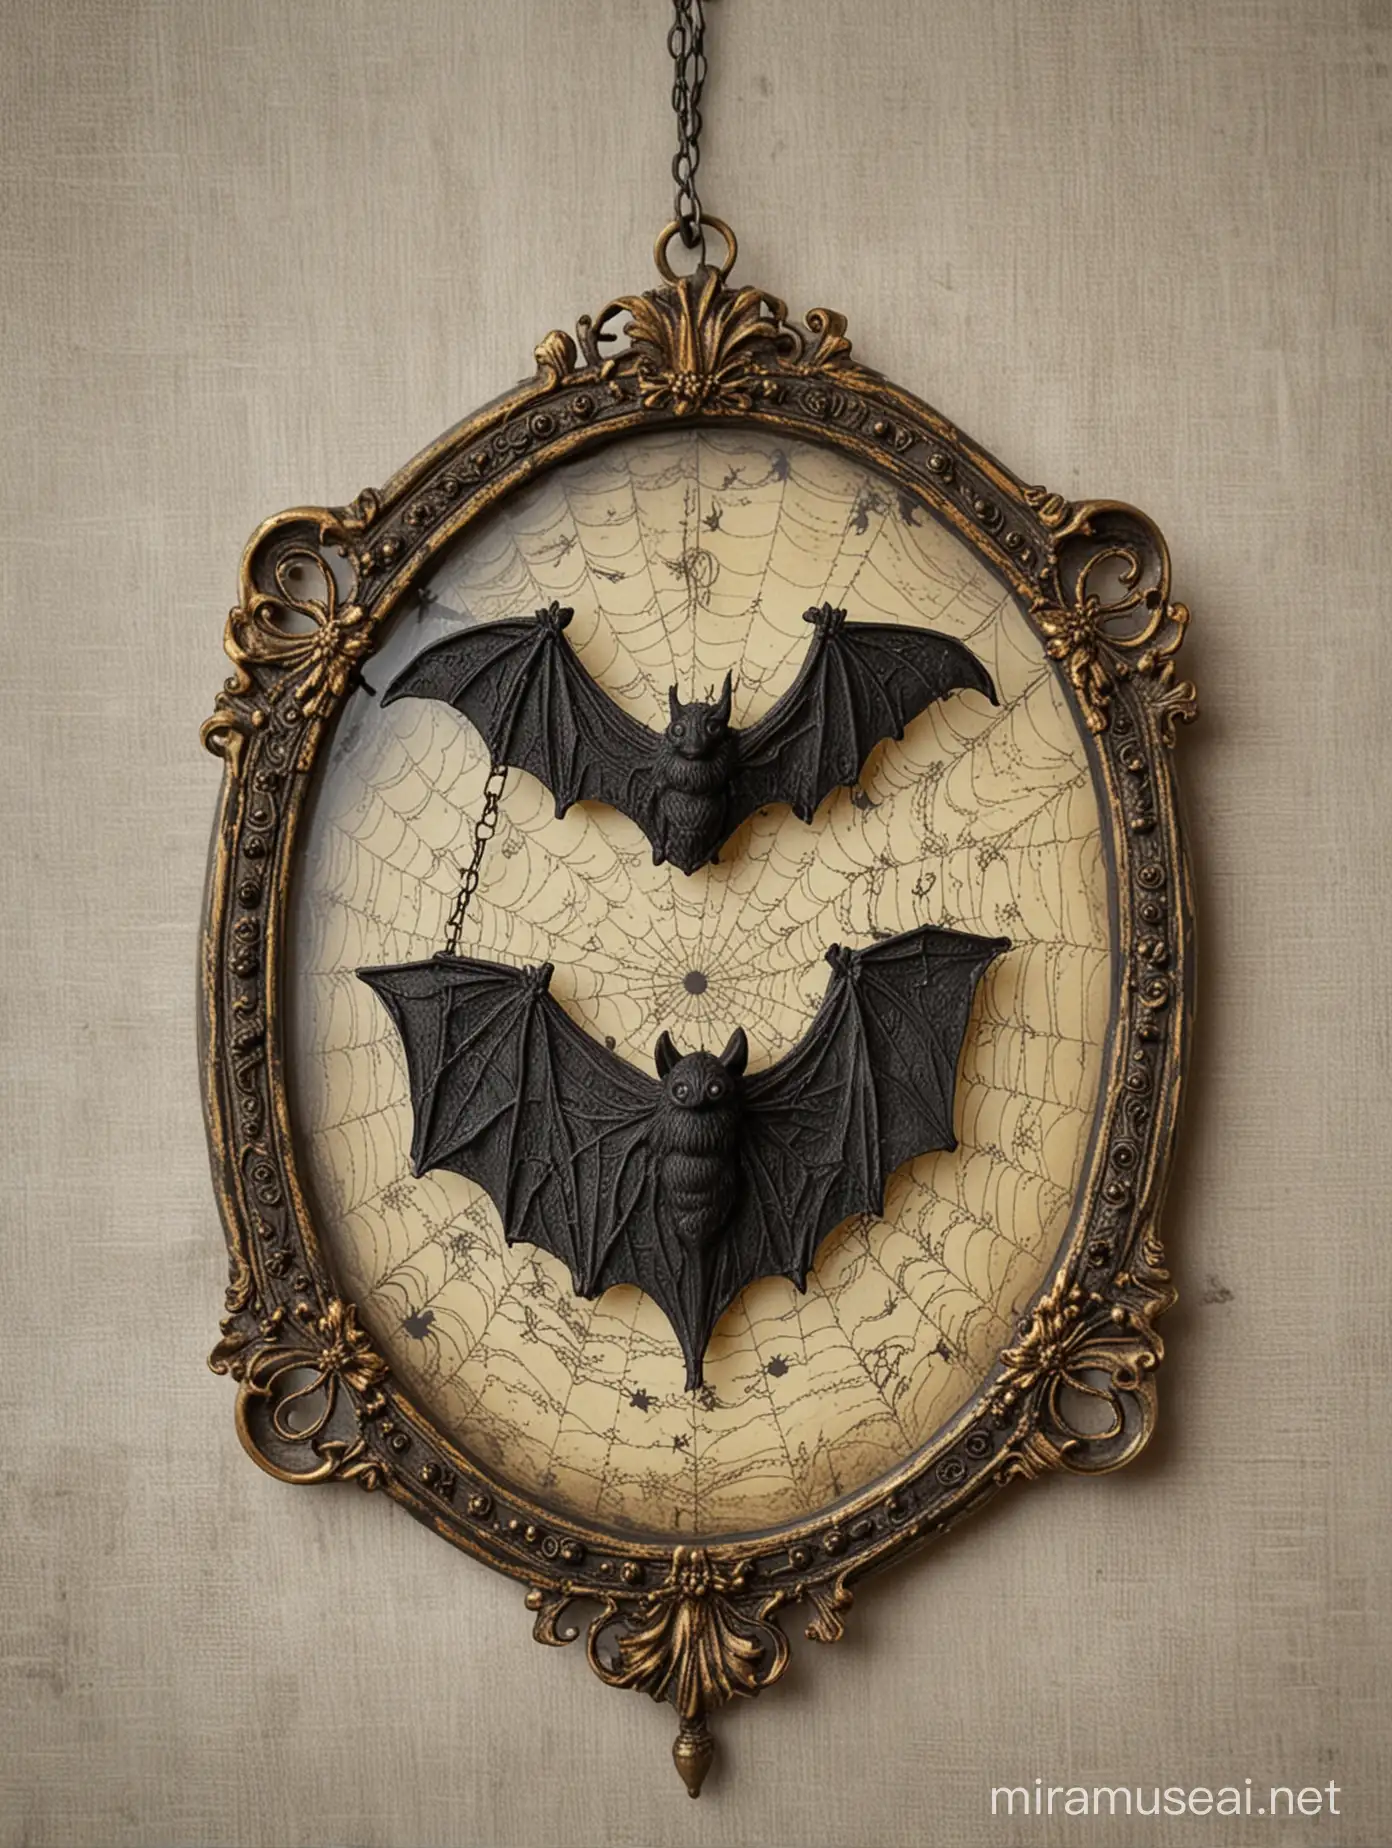 Antique Bat Cameo Hanging in Spooky Spider Web